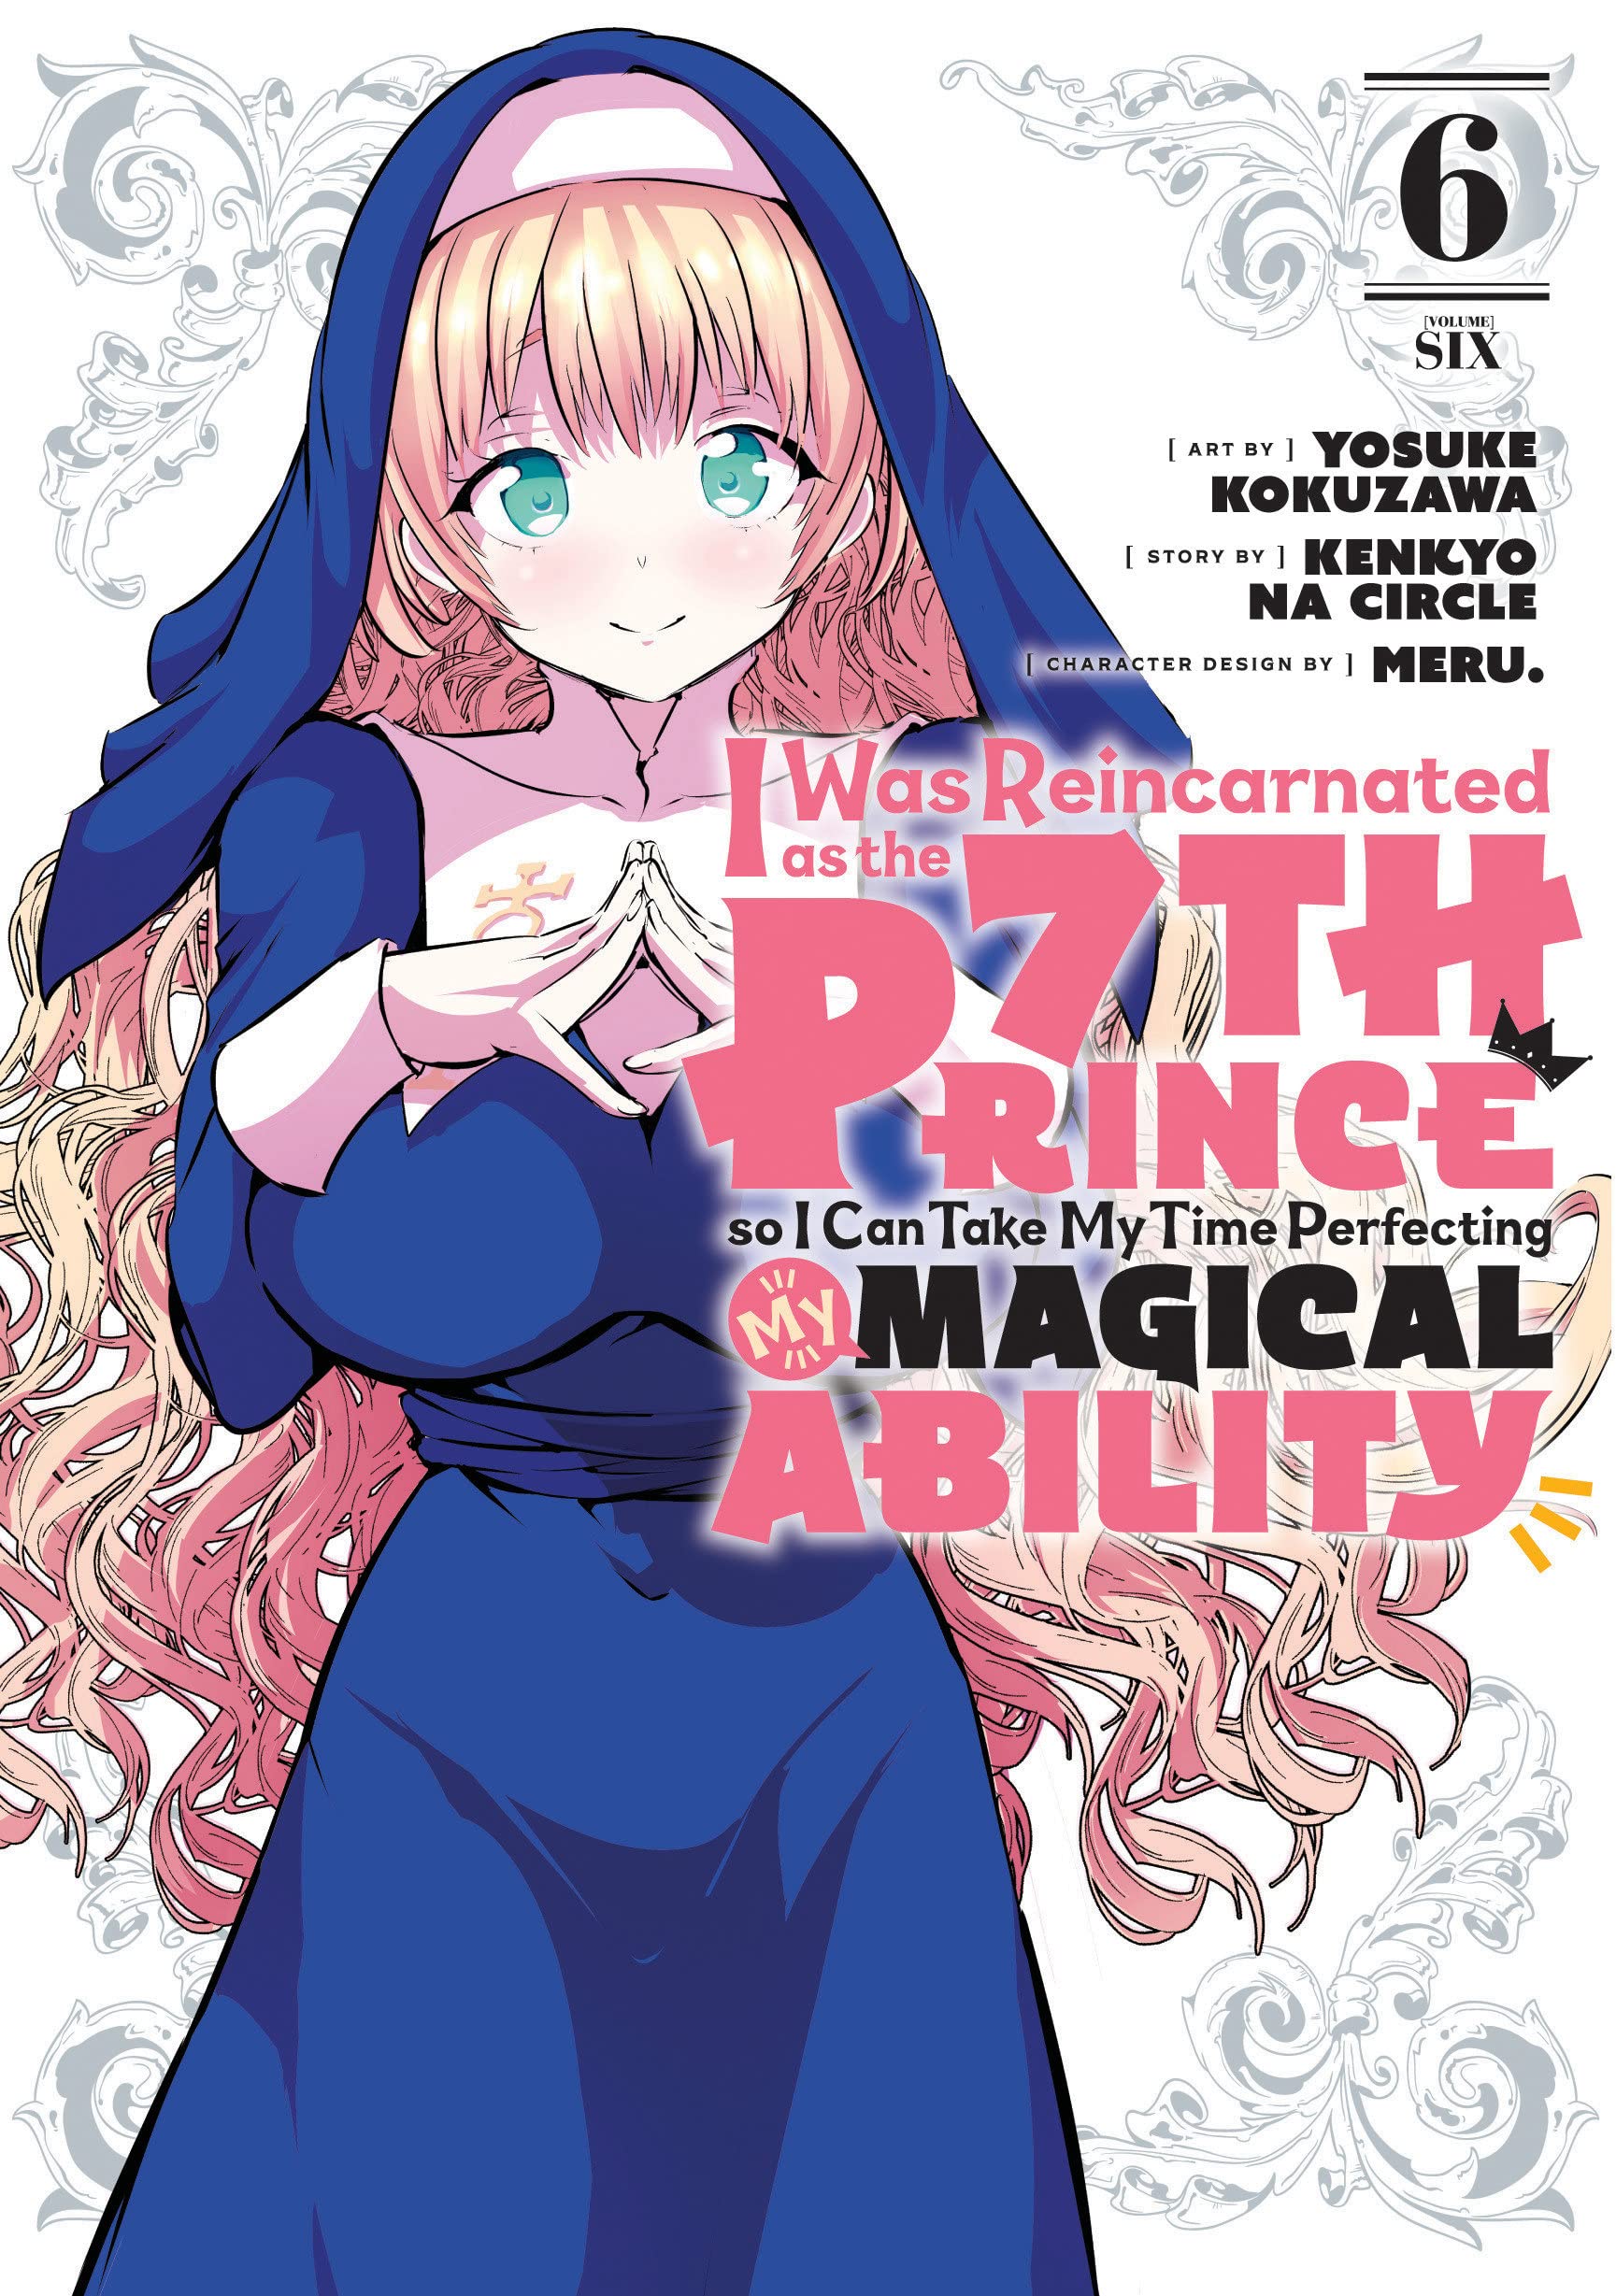 I Was Reincarnated as the 7th Prince so I Can Take My Time Perfecting My Magical Ability (Manga) Vol. 06